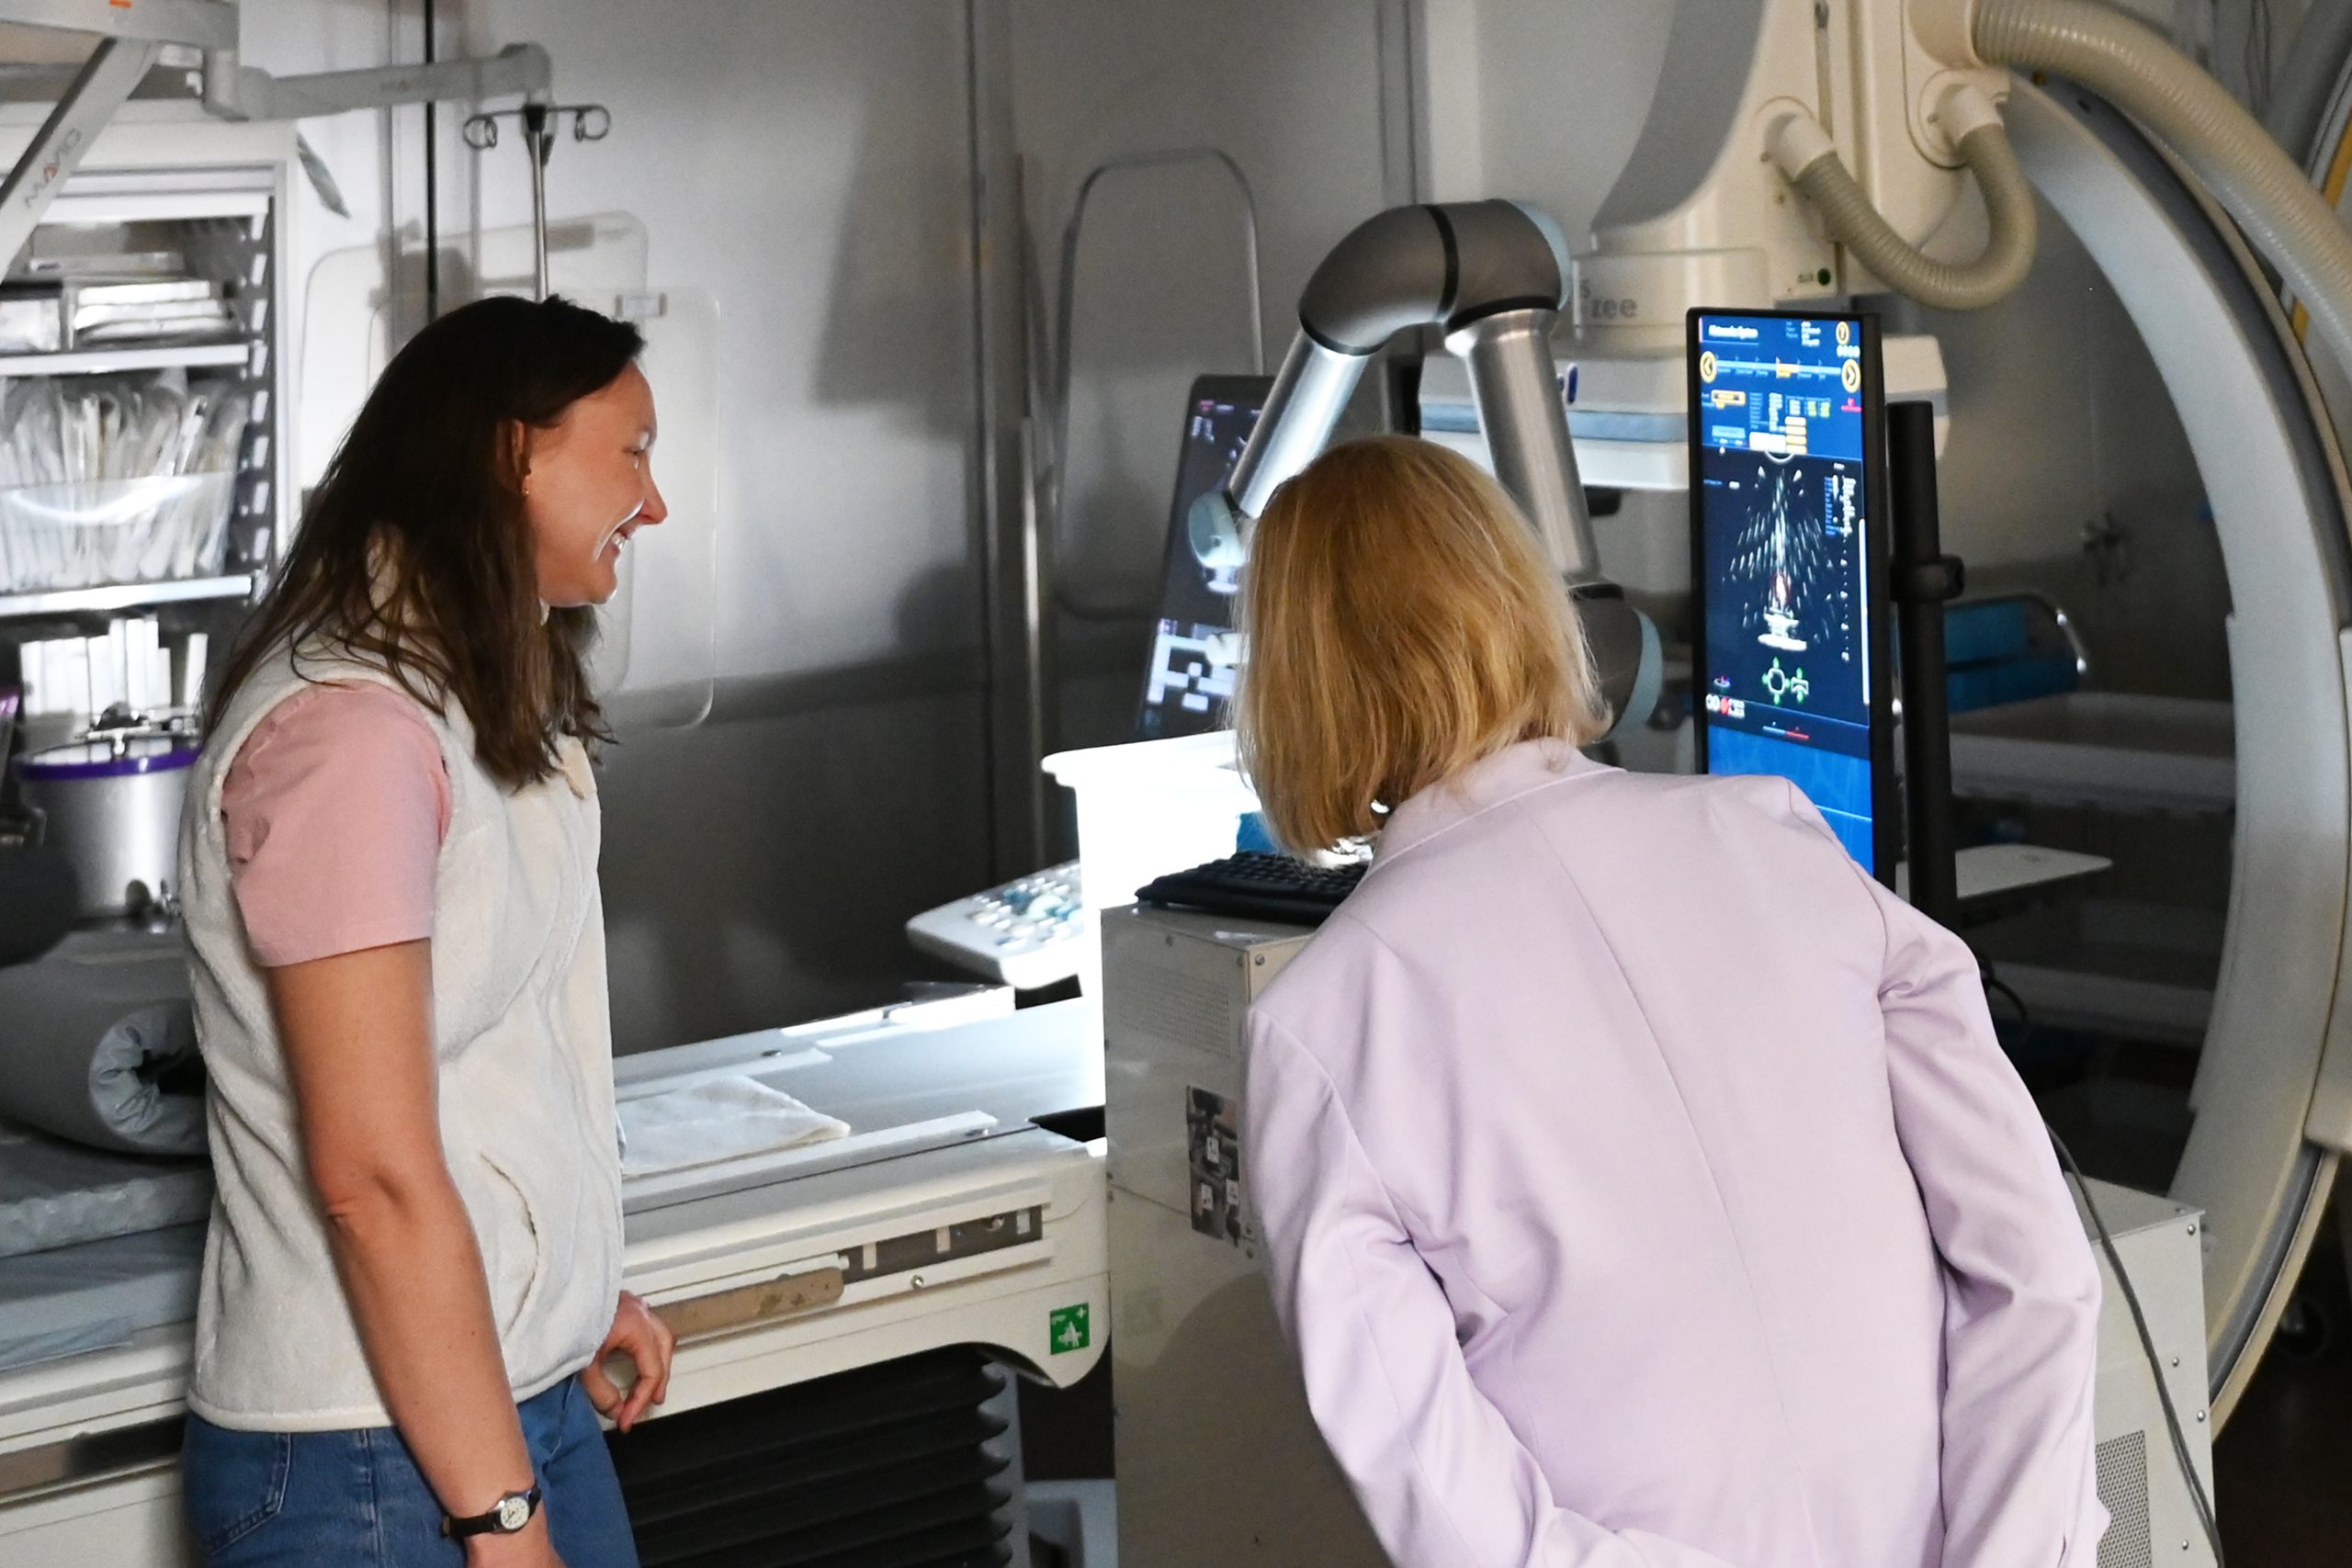 Meridith Kisting stand to the right speaking to Tammy Baldwin who faces away from the camera listening and observing the equipment Kisting is describing. In the background, is medical equipment including a large screen and scanning equipment.